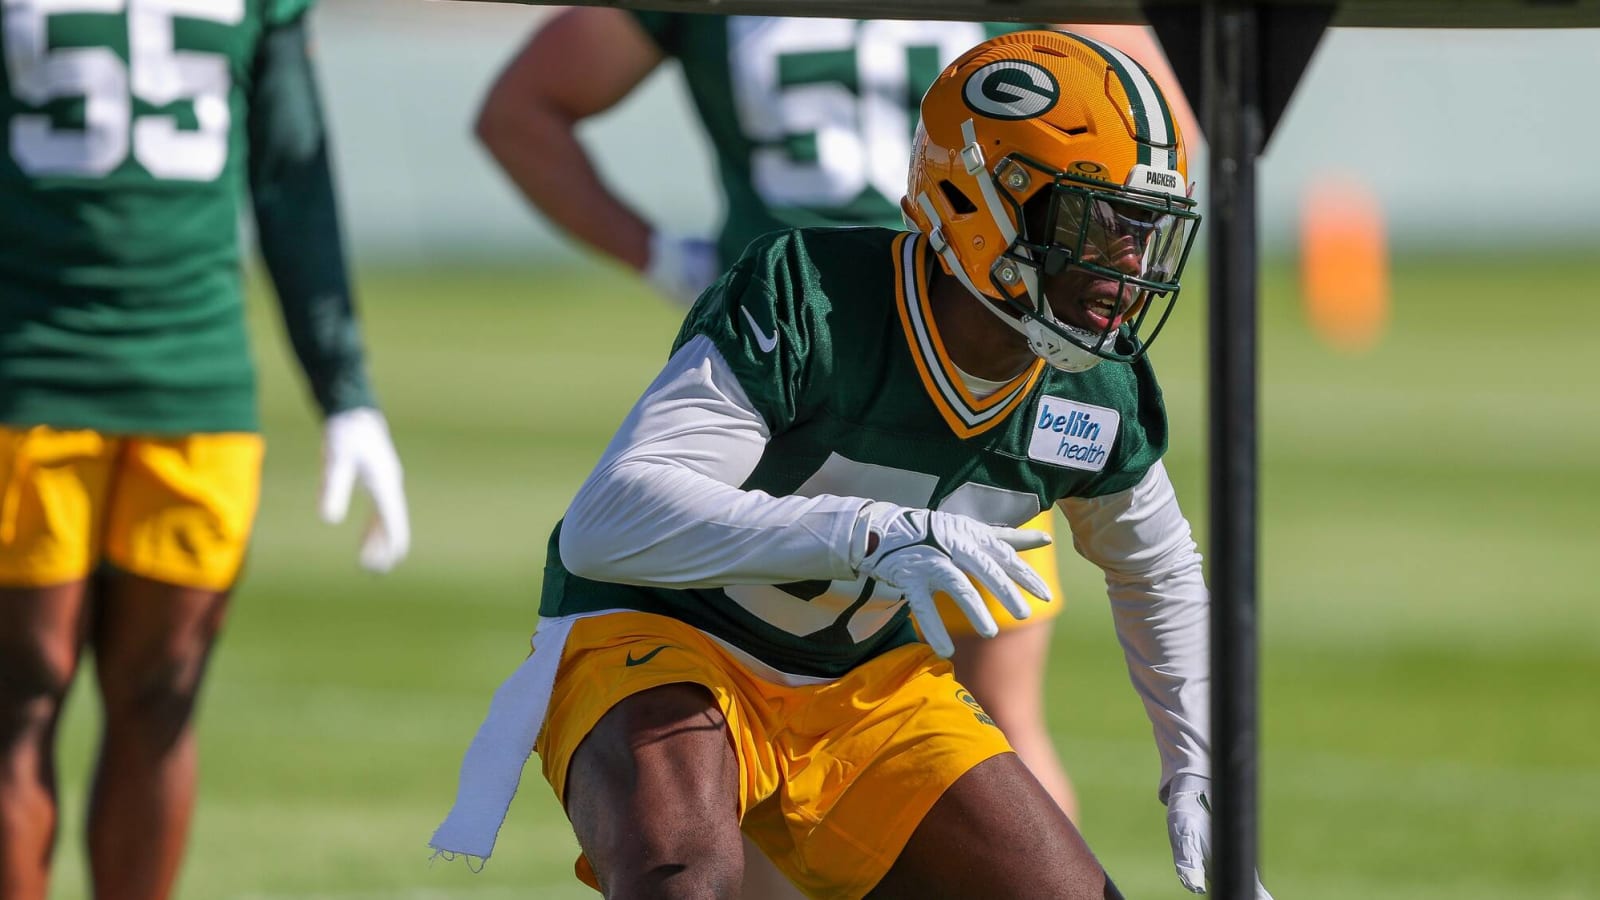 Green Bay Packers Will Have “Fast” Defense